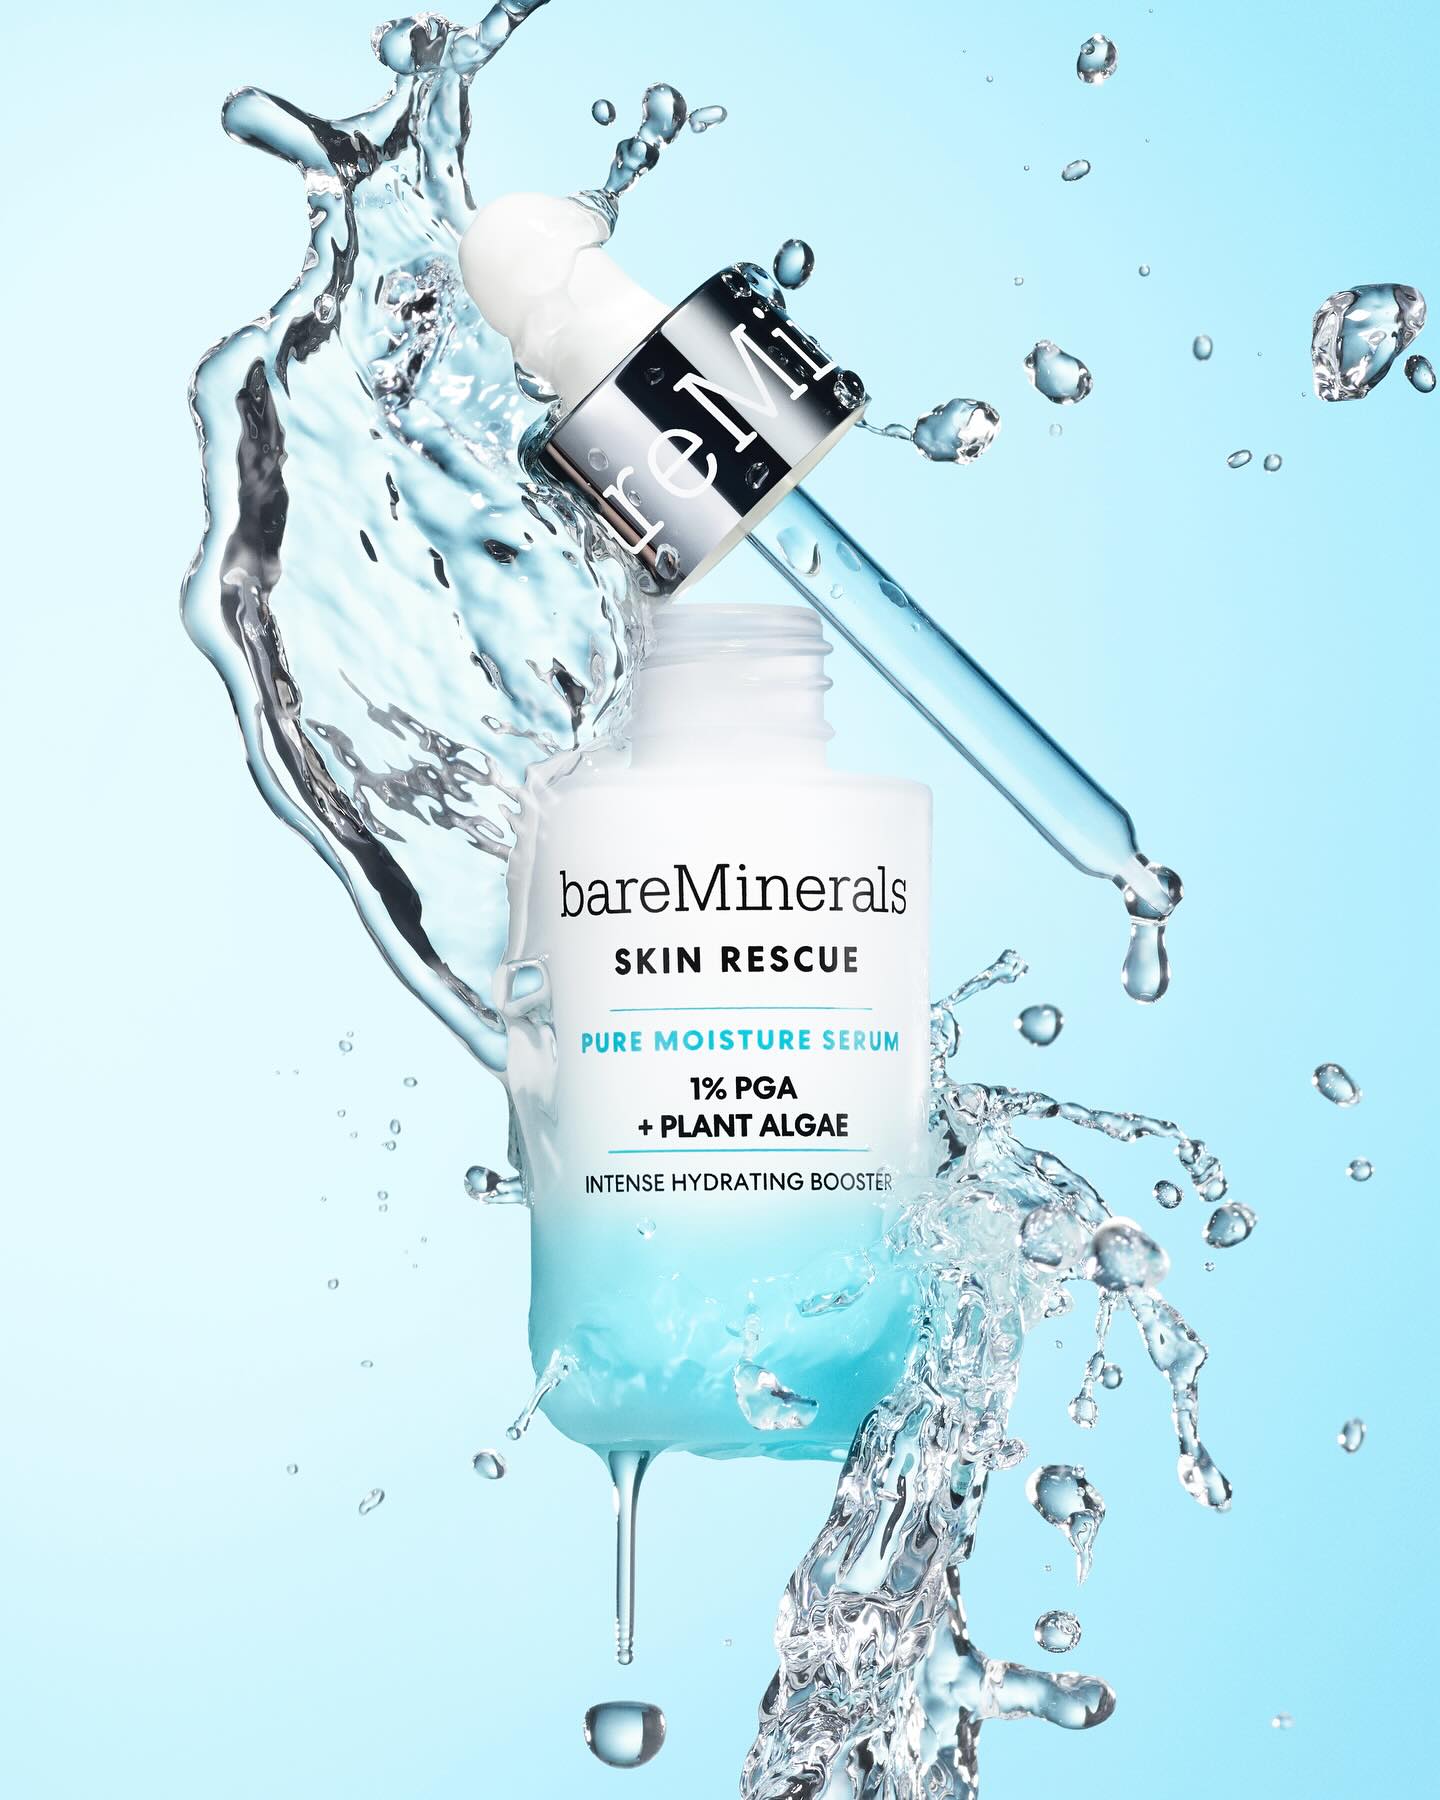 Brand Elevation Agency, Free The Birds, Designs Packaging For New Range Of Serums From Iconic Beauty Brand, bareMinerals